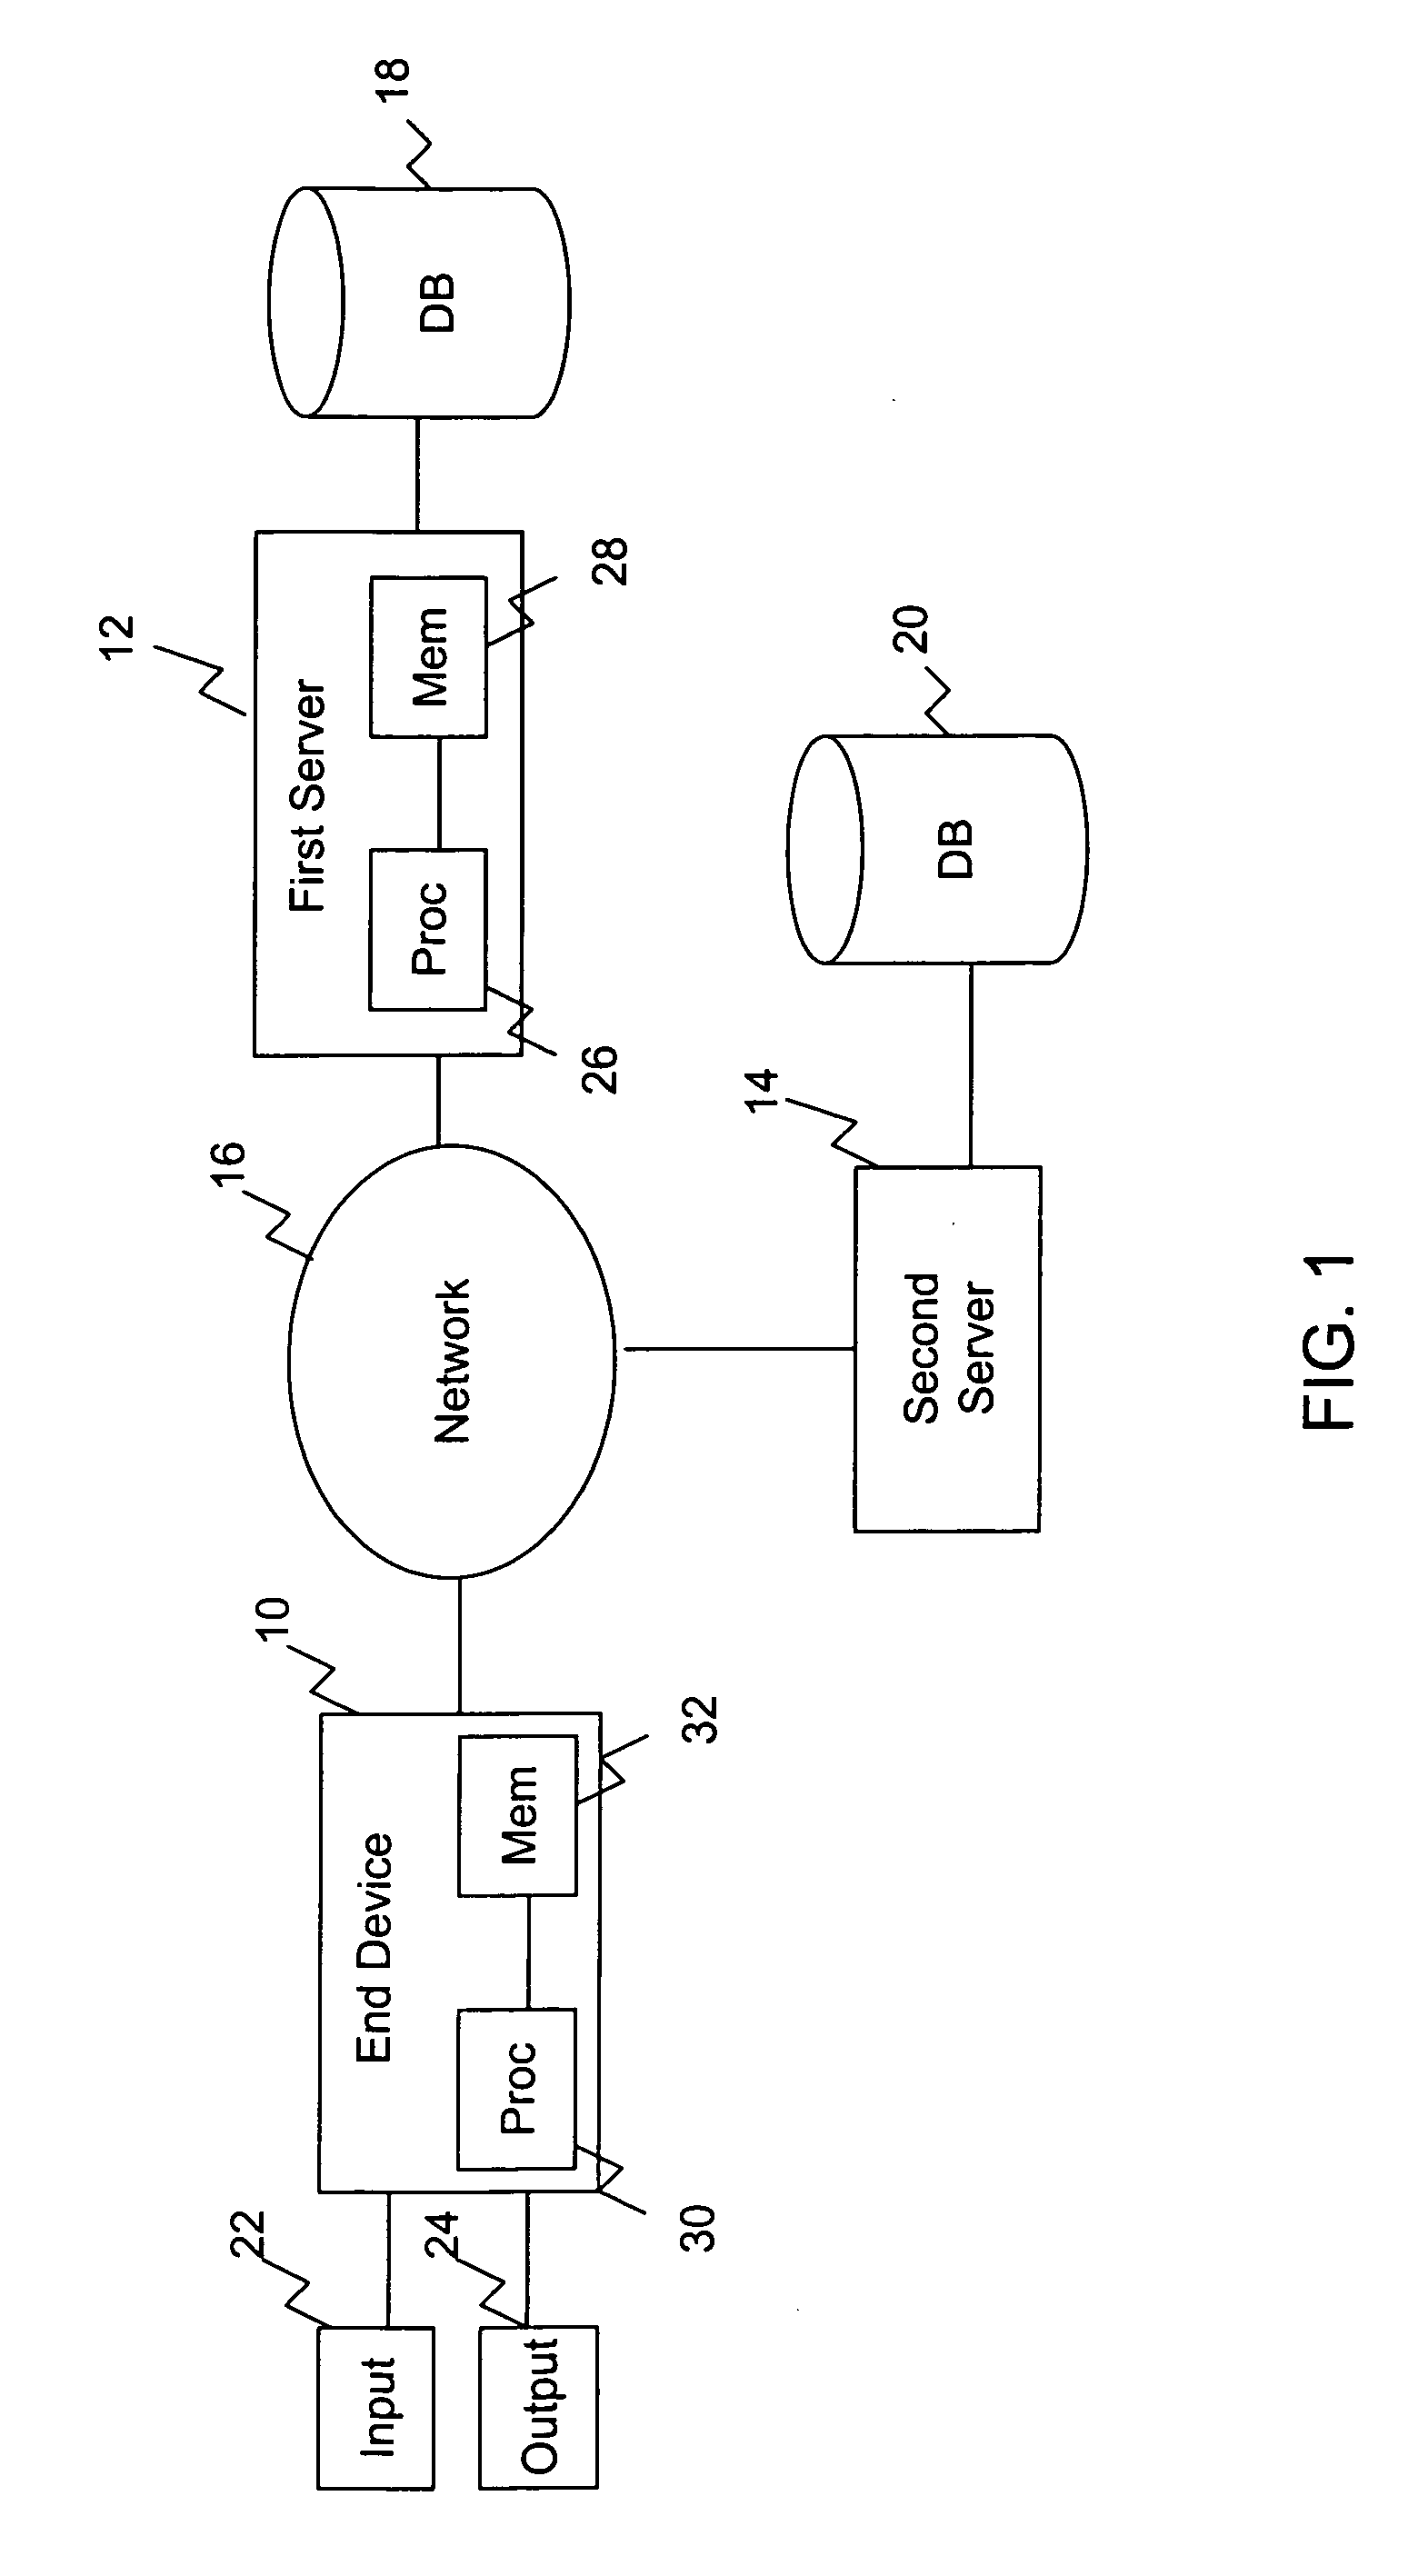 Music searching system and method